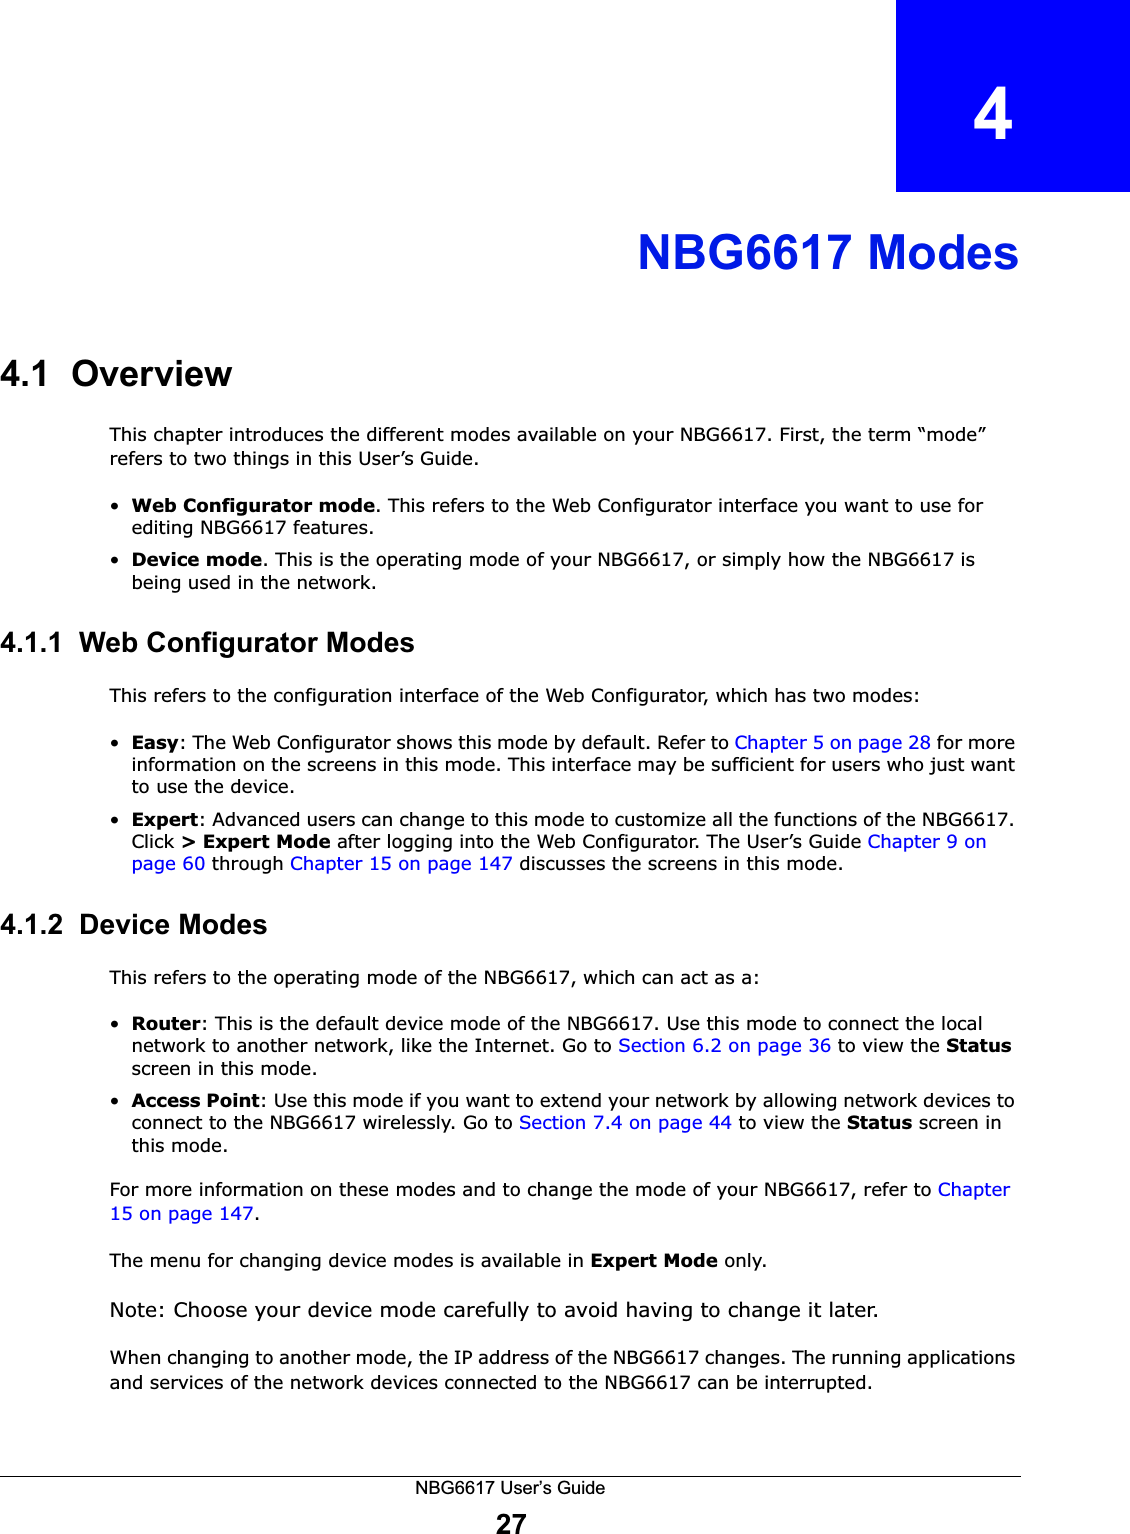 NBG6617 User’s Guide27CHAPTER   4NBG6617 Modes4.1  OverviewThis chapter introduces the different modes available on your NBG6617. First, the term “mode” refers to two things in this User’s Guide.•Web Configurator mode. This refers to the Web Configurator interface you want to use for editing NBG6617 features. •Device mode. This is the operating mode of your NBG6617, or simply how the NBG6617 is being used in the network. 4.1.1  Web Configurator ModesThis refers to the configuration interface of the Web Configurator, which has two modes:•Easy: The Web Configurator shows this mode by default. Refer to Chapter 5 on page 28 for more information on the screens in this mode. This interface may be sufficient for users who just want to use the device.•Expert: Advanced users can change to this mode to customize all the functions of the NBG6617. Click &gt; Expert Mode after logging into the Web Configurator. The User’s Guide Chapter 9 on page 60 through Chapter 15 on page 147 discusses the screens in this mode.4.1.2  Device ModesThis refers to the operating mode of the NBG6617, which can act as a:•Router: This is the default device mode of the NBG6617. Use this mode to connect the local network to another network, like the Internet. Go to Section 6.2 on page 36 to view the Status screen in this mode.•Access Point: Use this mode if you want to extend your network by allowing network devices to connect to the NBG6617 wirelessly. Go to Section 7.4 on page 44 to view the Status screen in this mode.For more information on these modes and to change the mode of your NBG6617, refer to Chapter 15 on page 147.The menu for changing device modes is available in Expert Mode only. Note: Choose your device mode carefully to avoid having to change it later.When changing to another mode, the IP address of the NBG6617 changes. The running applications and services of the network devices connected to the NBG6617 can be interrupted. 